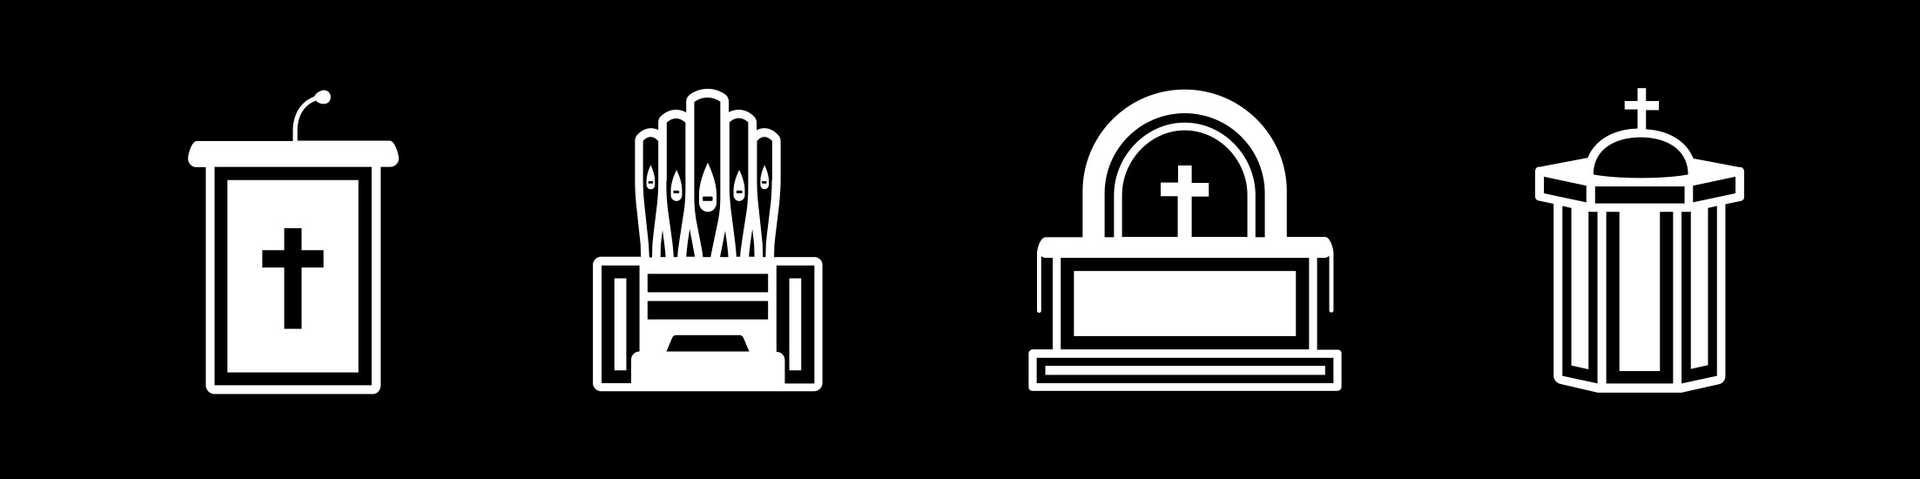 A picture of the icon set with white outlines on a black background.